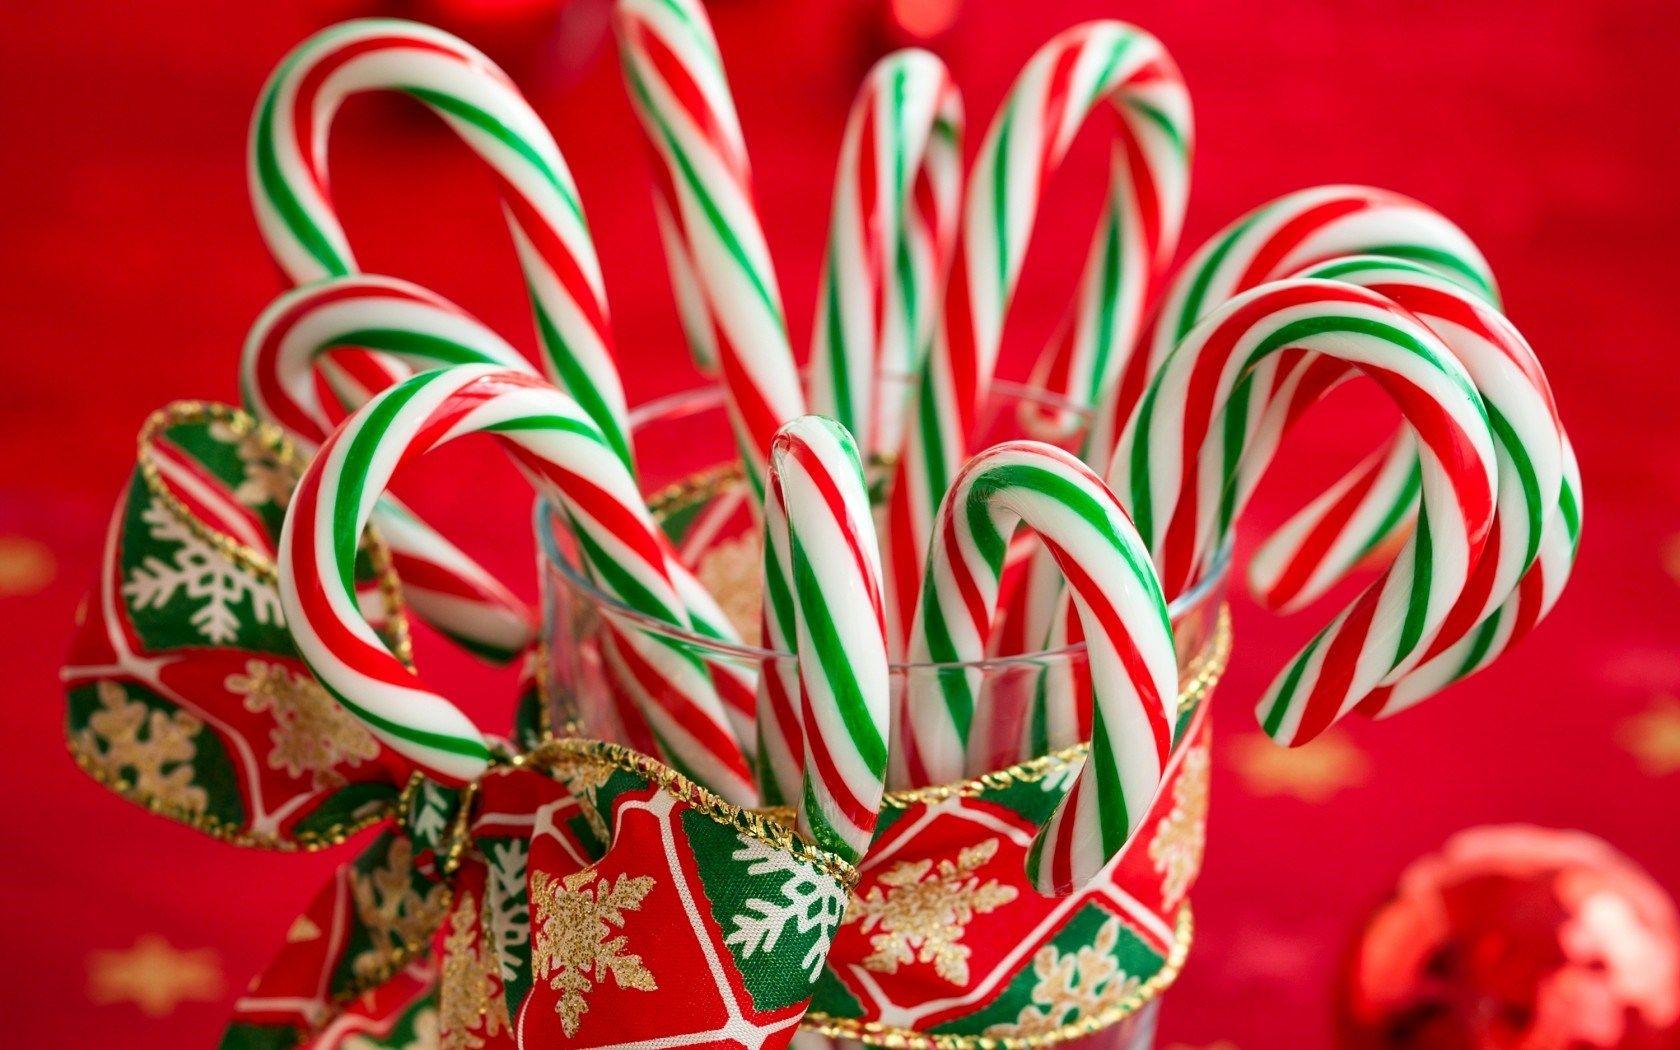 Christmas candy canes in a glass bowl - Candy cane